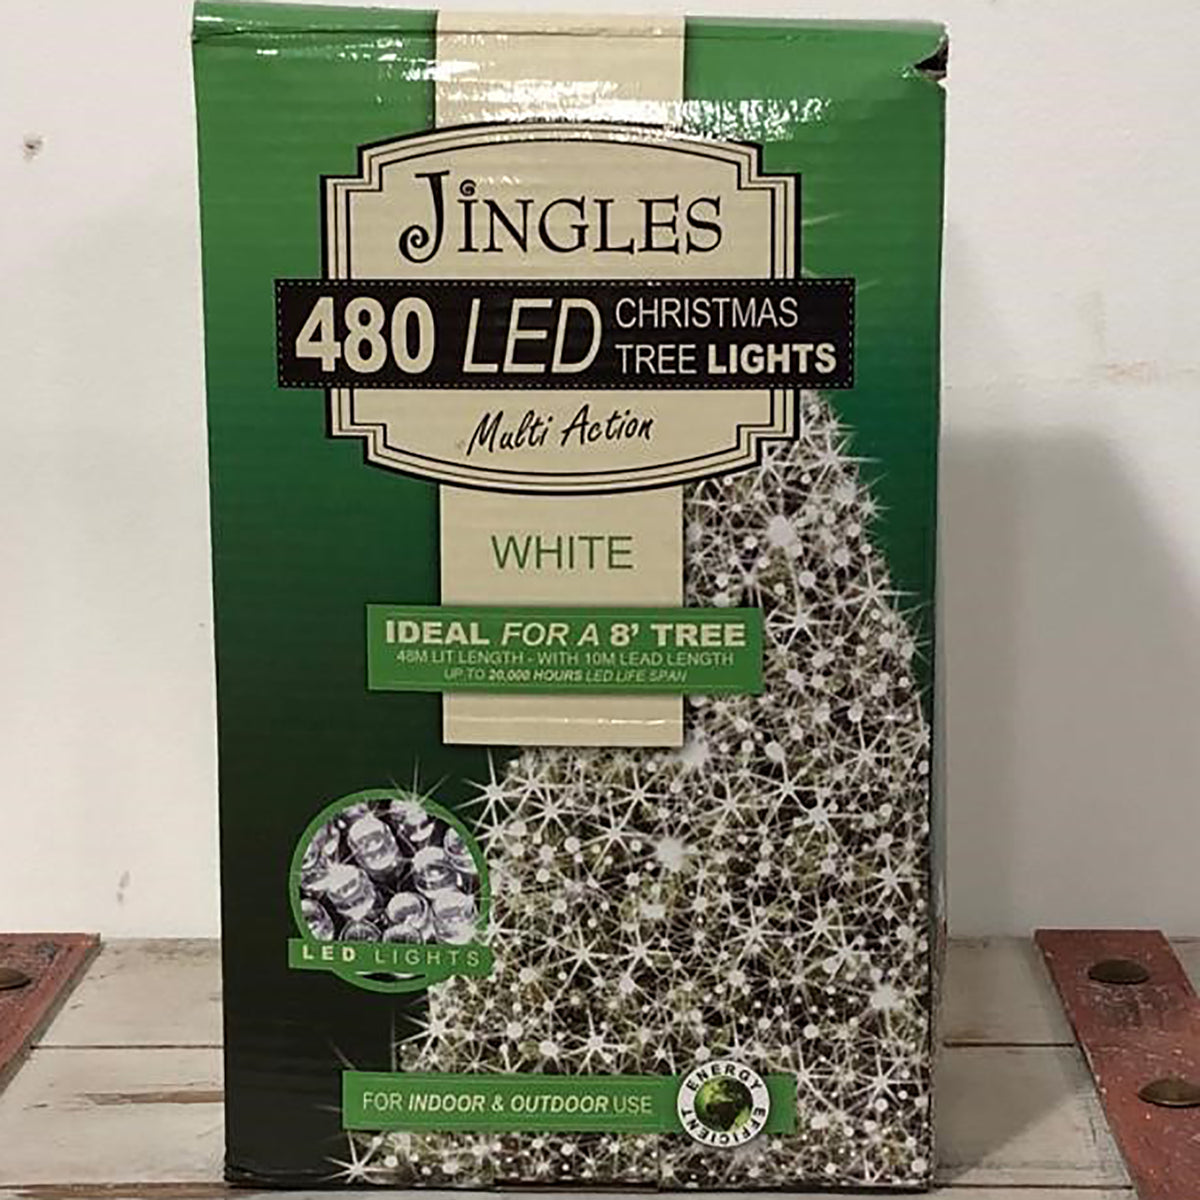 480 Multi Function LED White Christmas Lights by Jingles